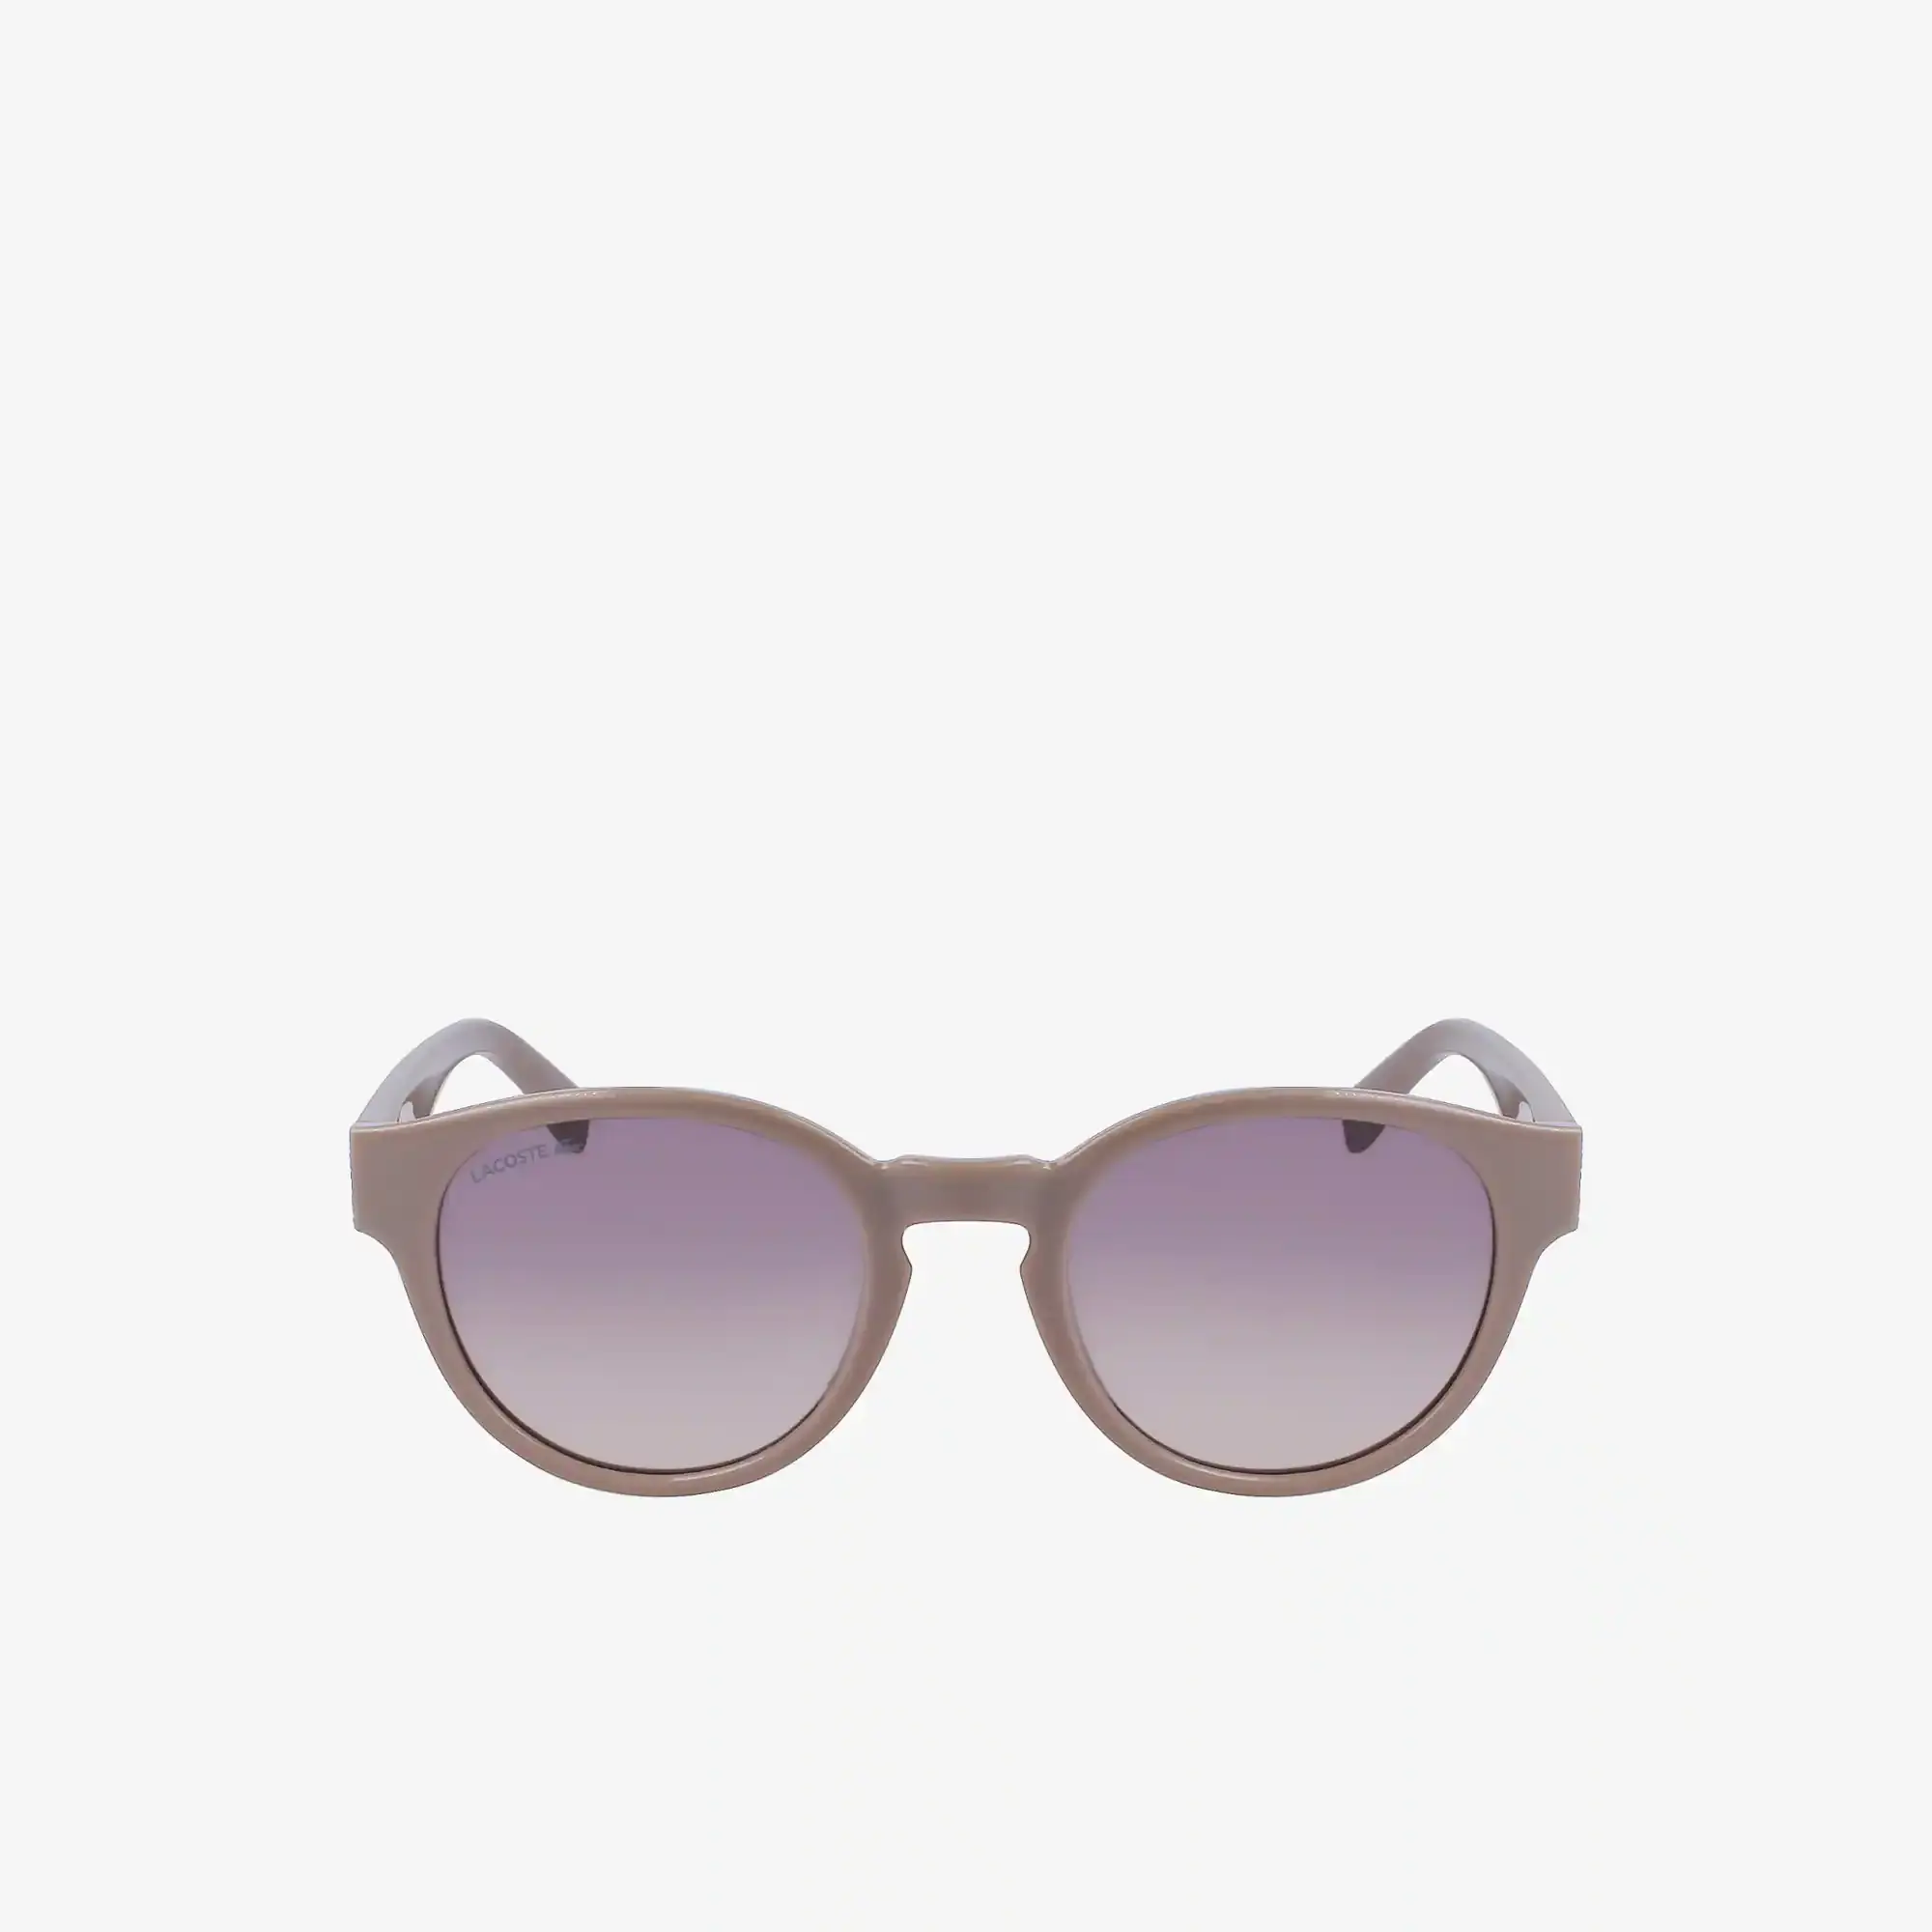 Lacoste Women's Oval Plant Based Resin L.12.12 Sunglasses. 2